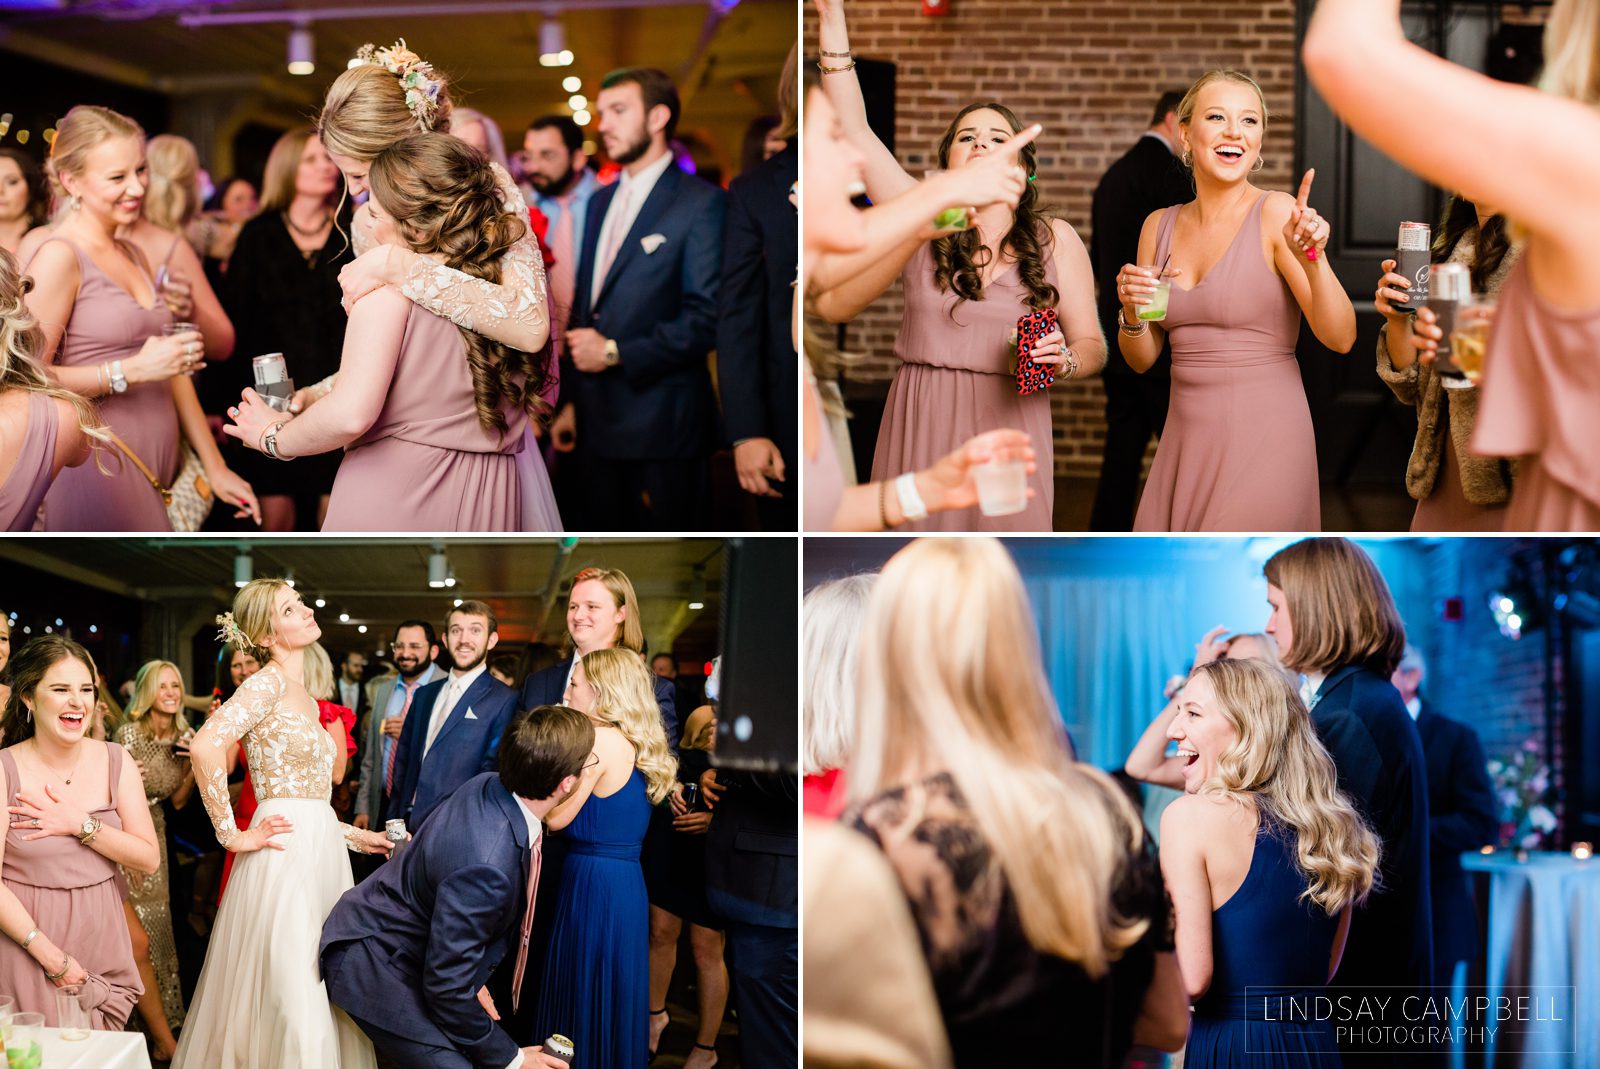 Memphis-Wedding-Photographer_0045 Southern Meets Modern at this Old Dominick Distillery Memphis Wedding